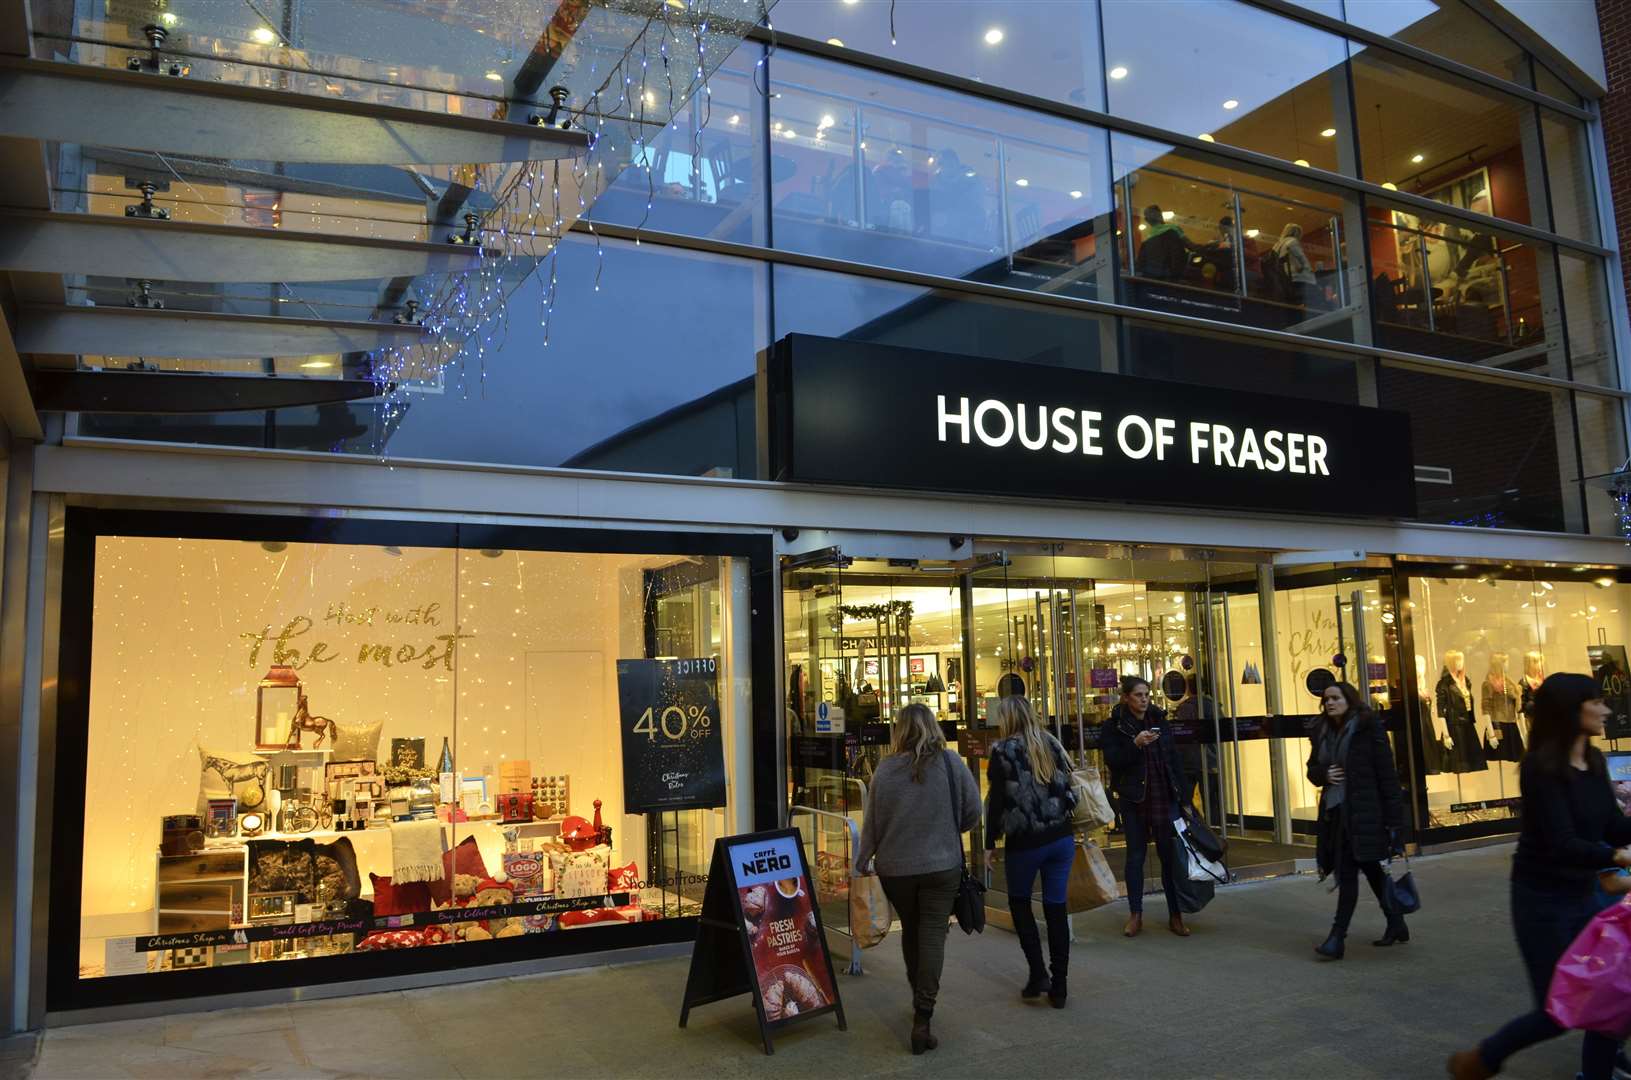 Maidstone's House of Fraser store